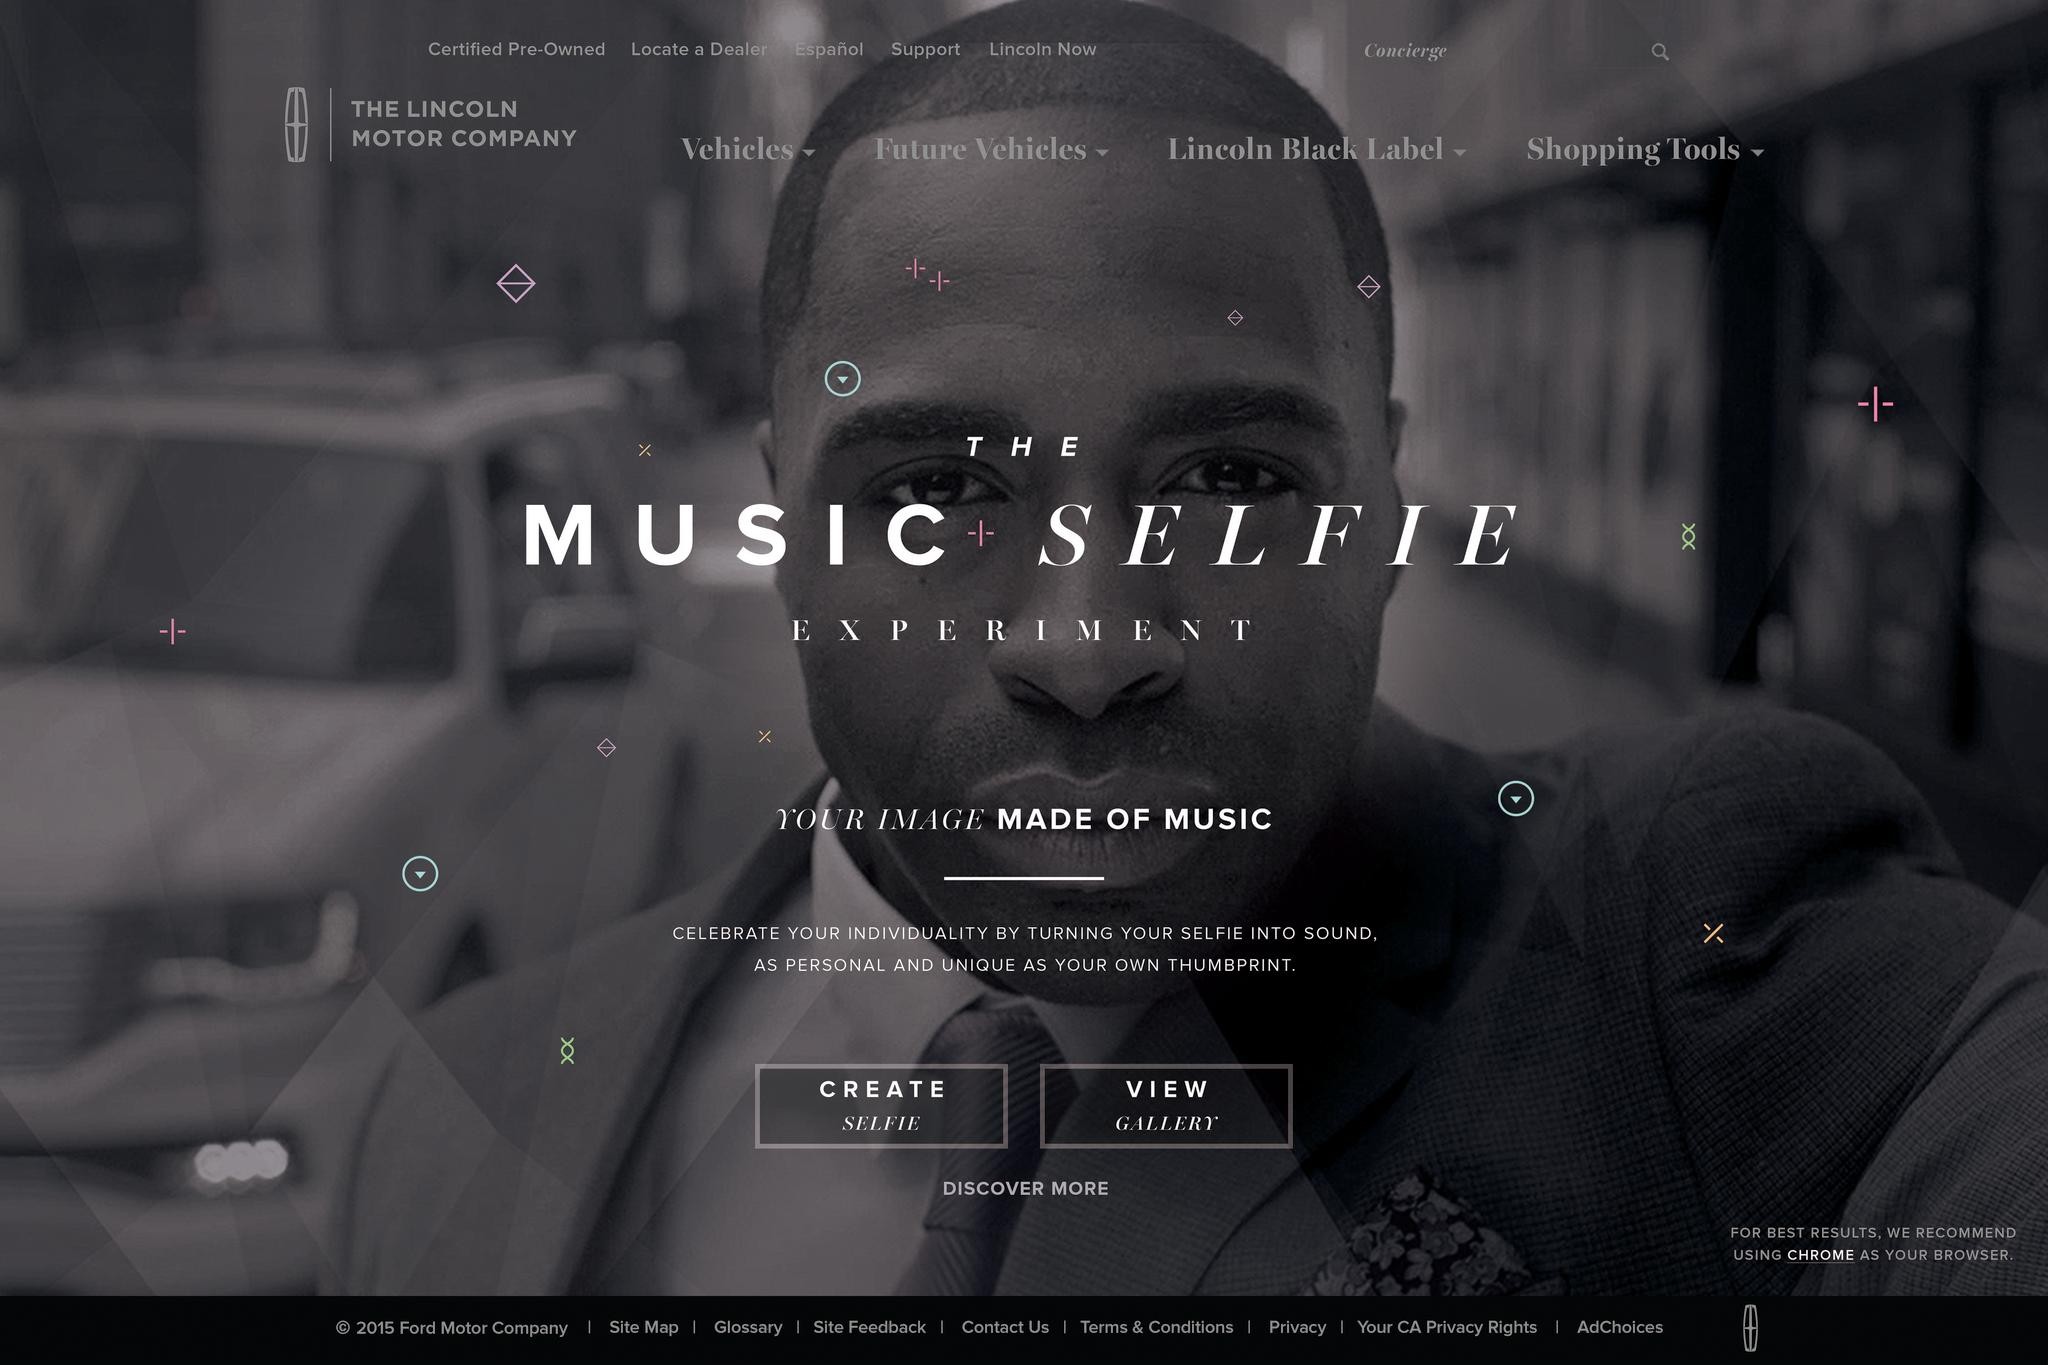 THE MUSIC SELFIE EXPERIMENT